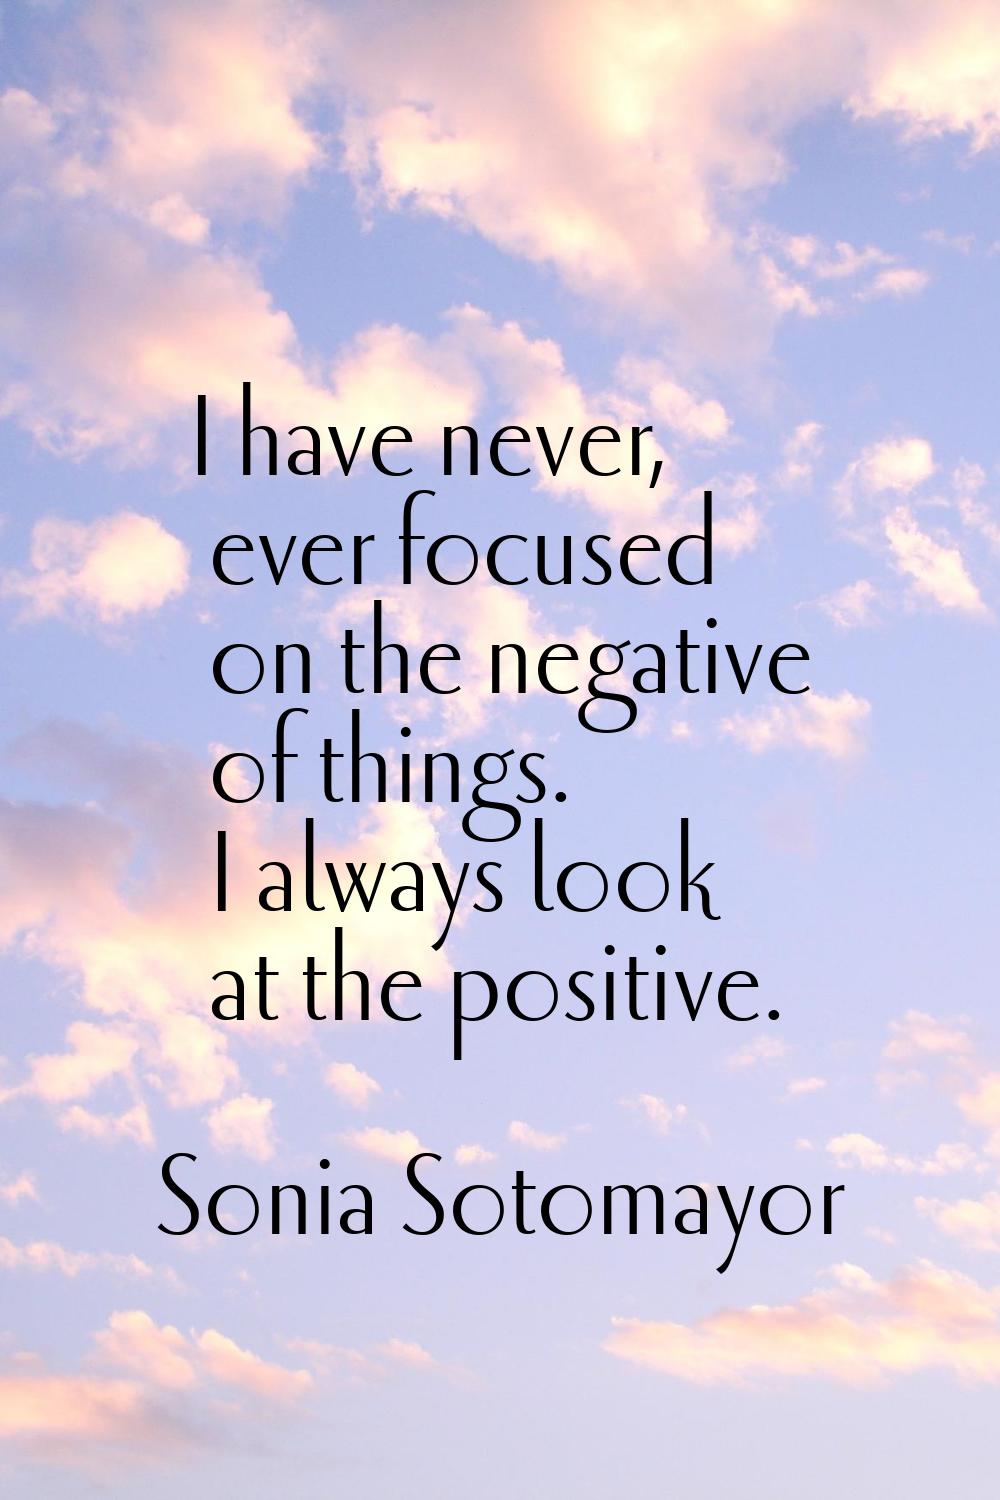 I have never, ever focused on the negative of things. I always look at the positive.